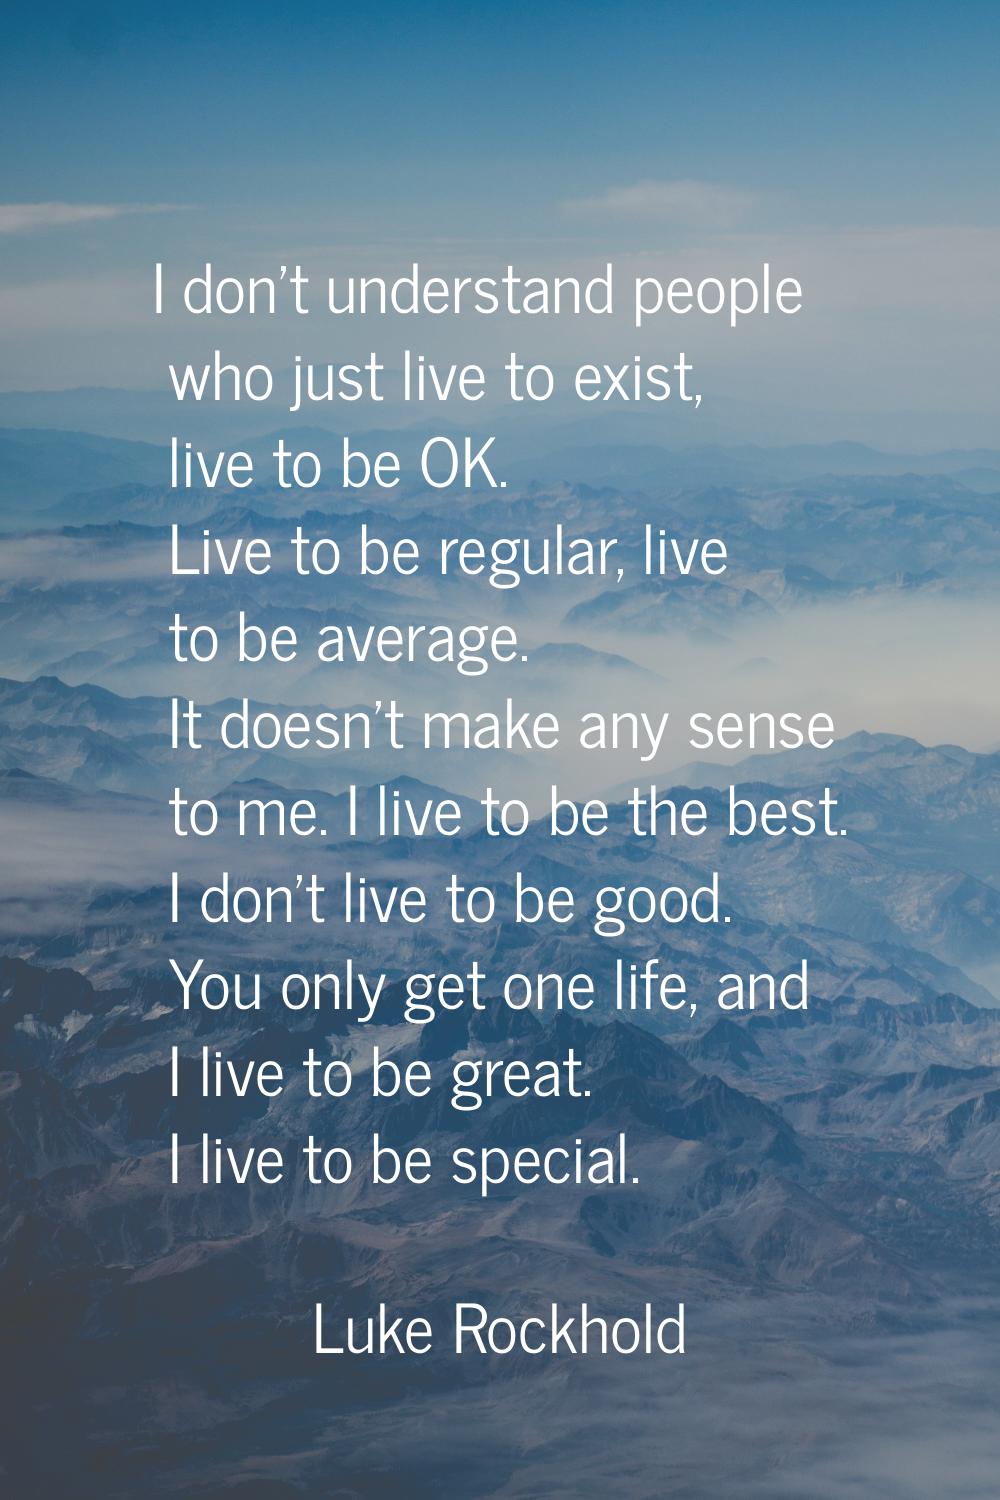 I don't understand people who just live to exist, live to be OK. Live to be regular, live to be ave